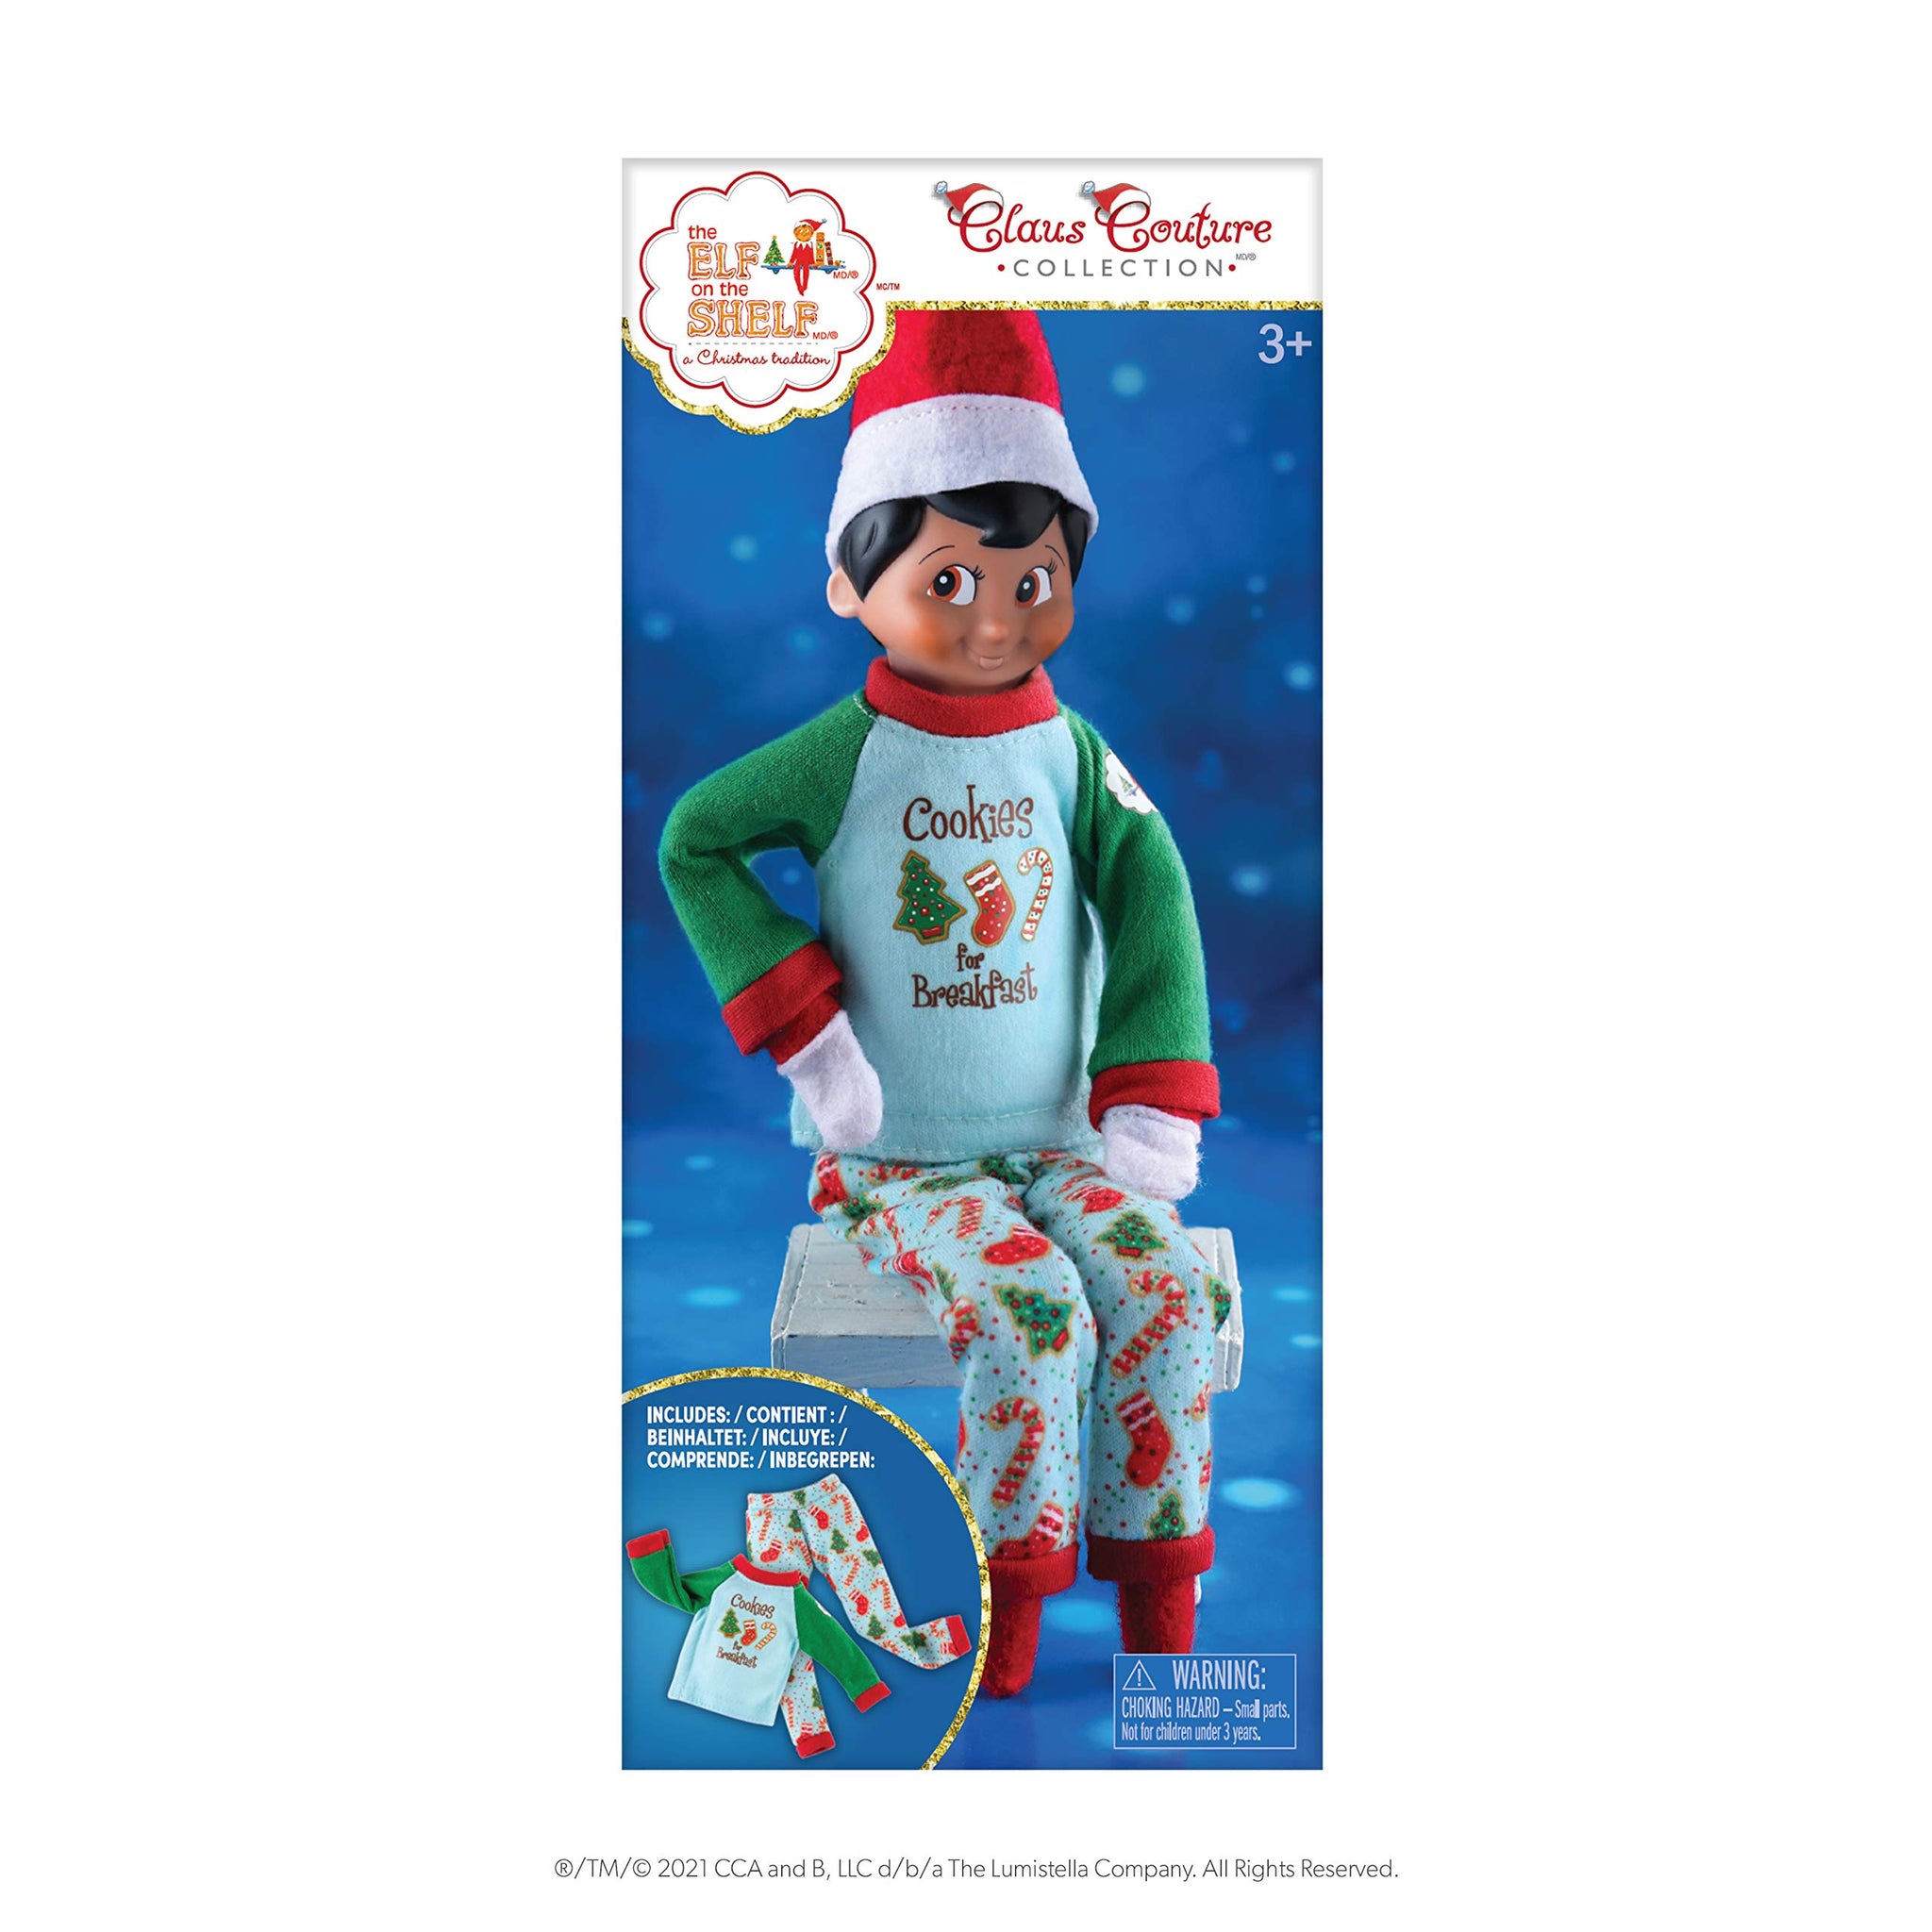 Elf On The Shelf Scout Elf and Christmas Tradition Box Set